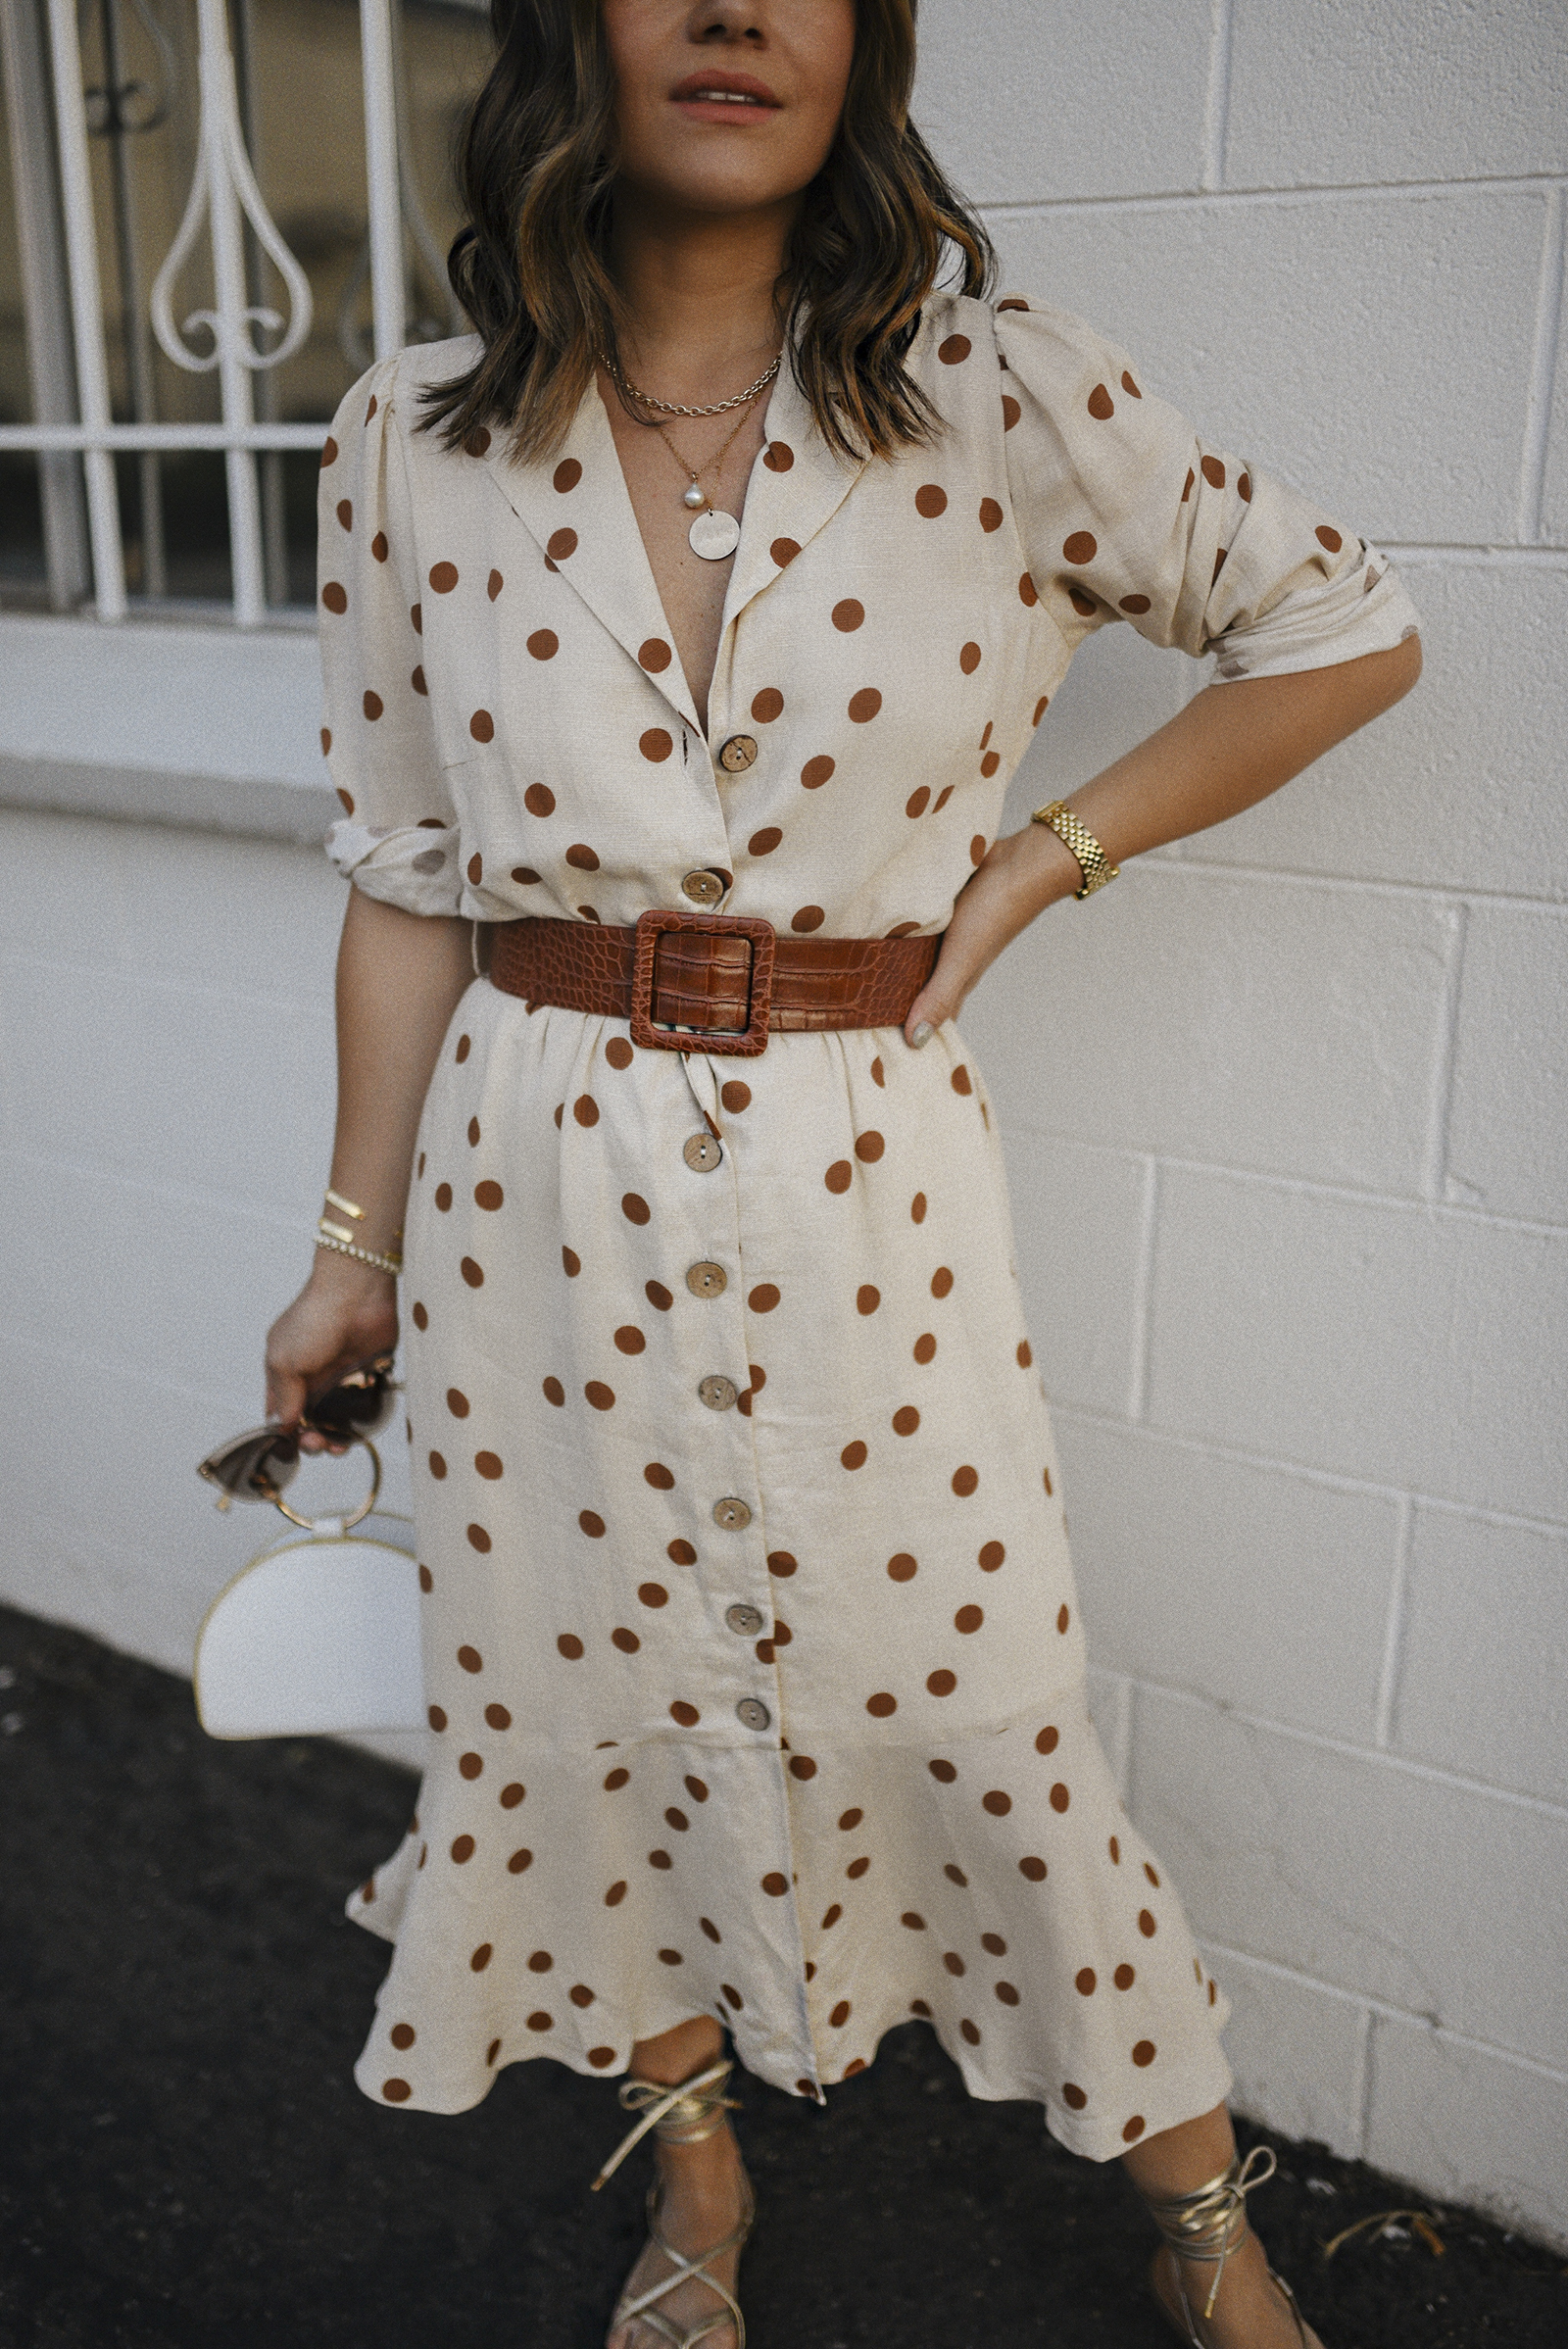 Carolina Hellal of Chic Talk wearing a Lucy Paris Polka dot midi dress, Irridescense white bag, Scoop gold lace up sandals and RAEN sunglasses